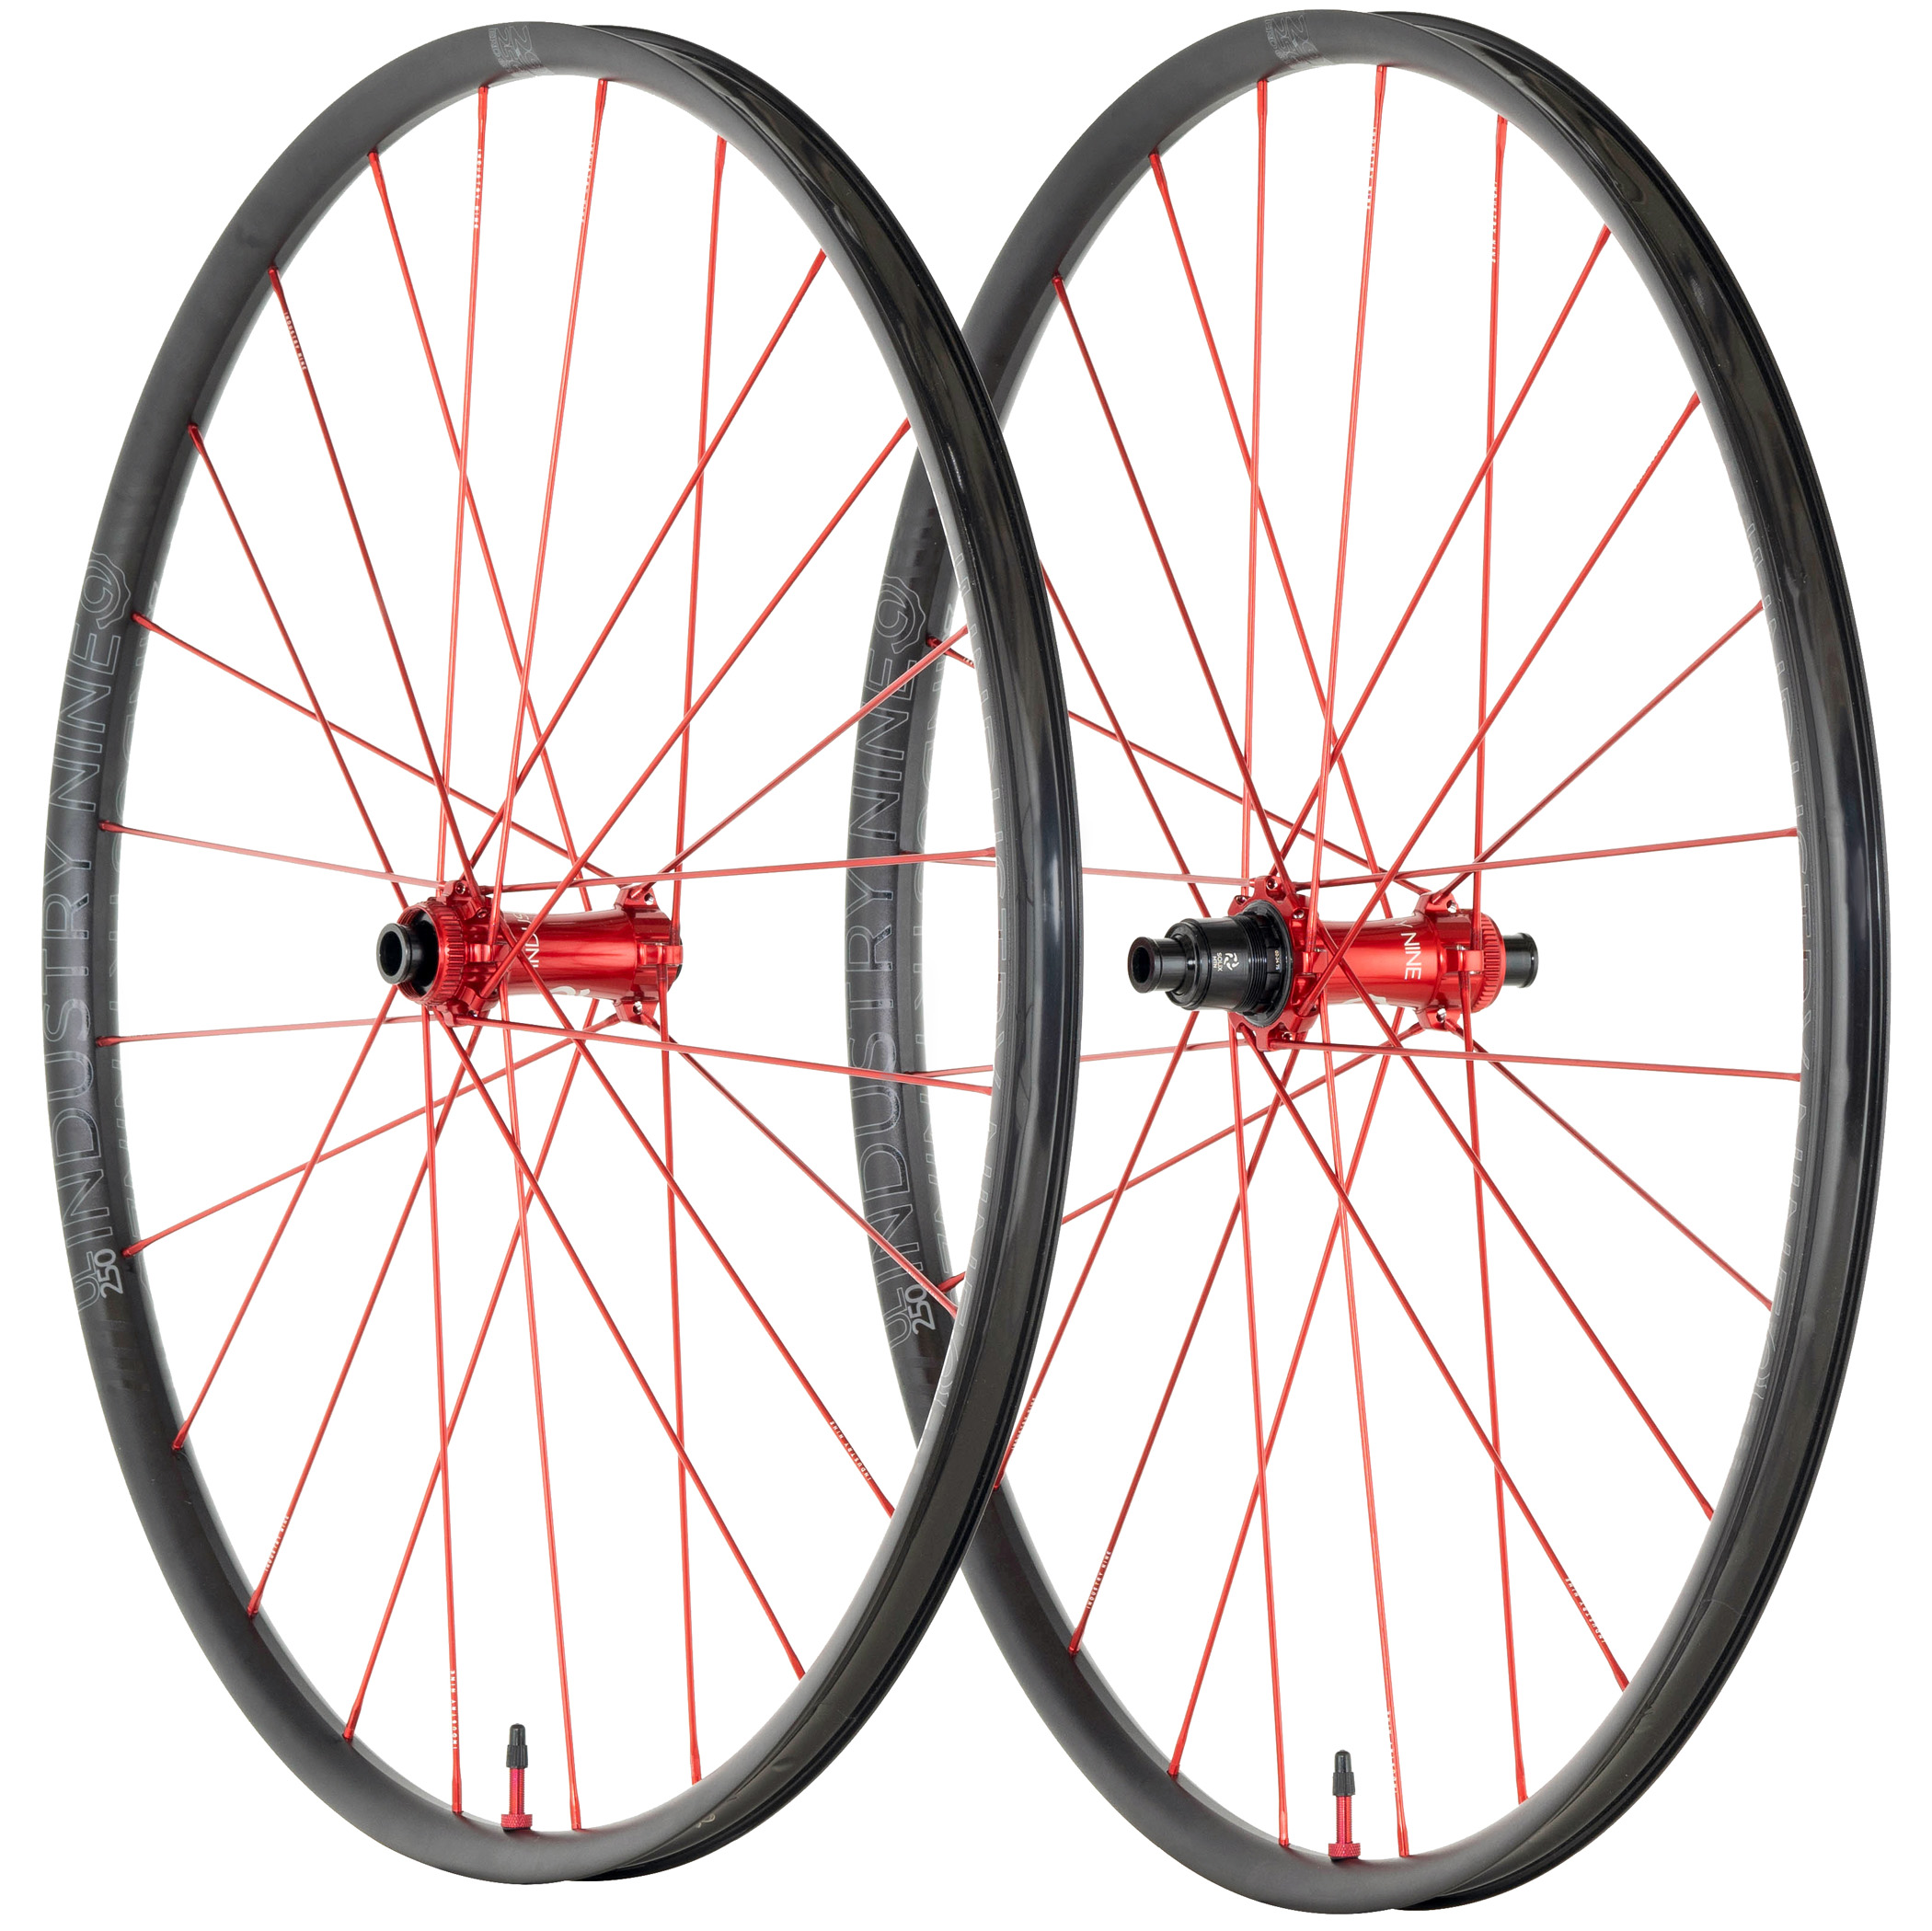 David Golay reviews the Industry Nine SOLiX M Wheels for Blister